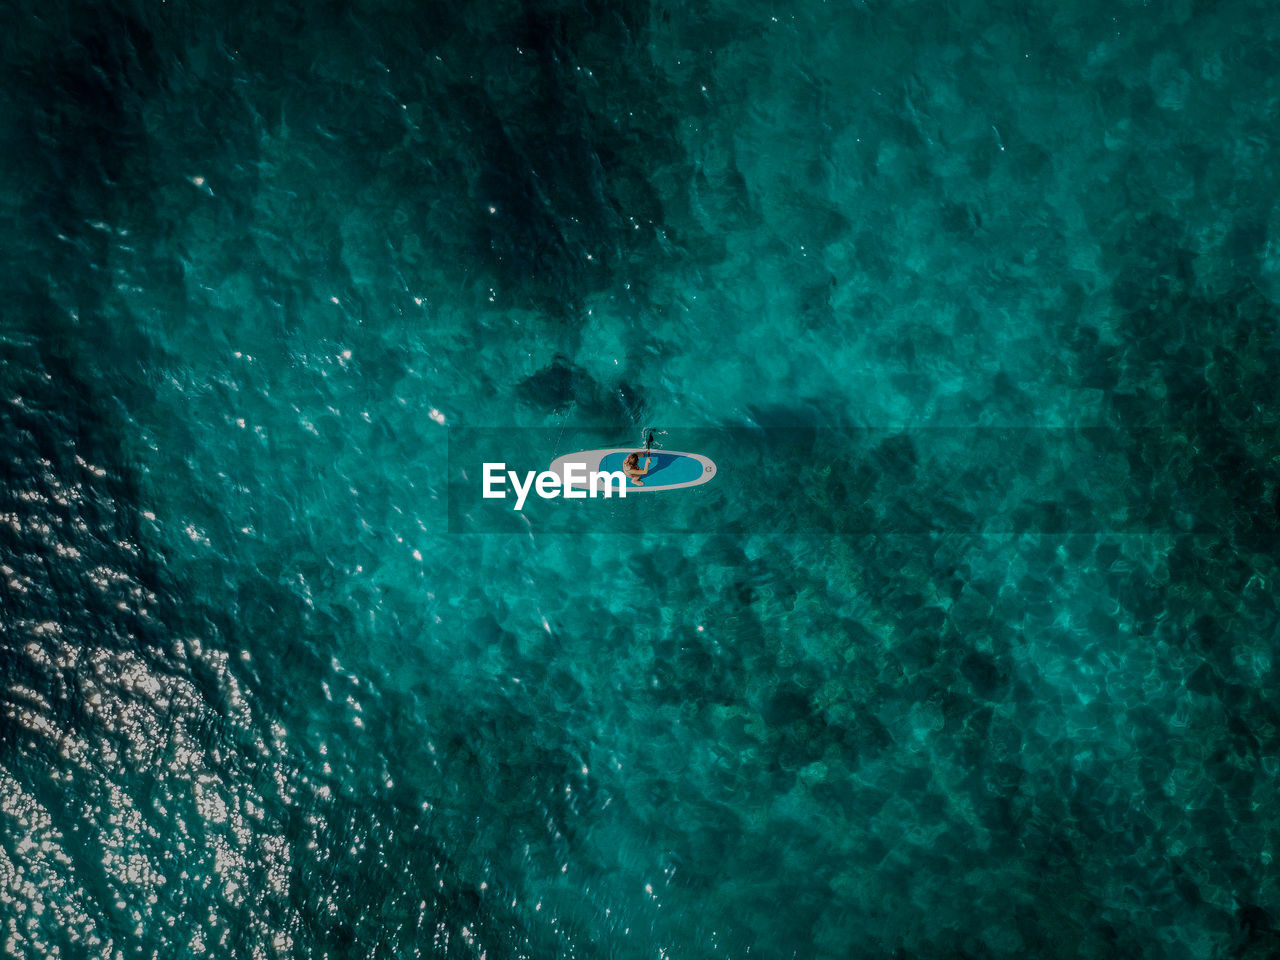 Aerial drone photo of a woman on a standup paddle board in beautiful blue water.